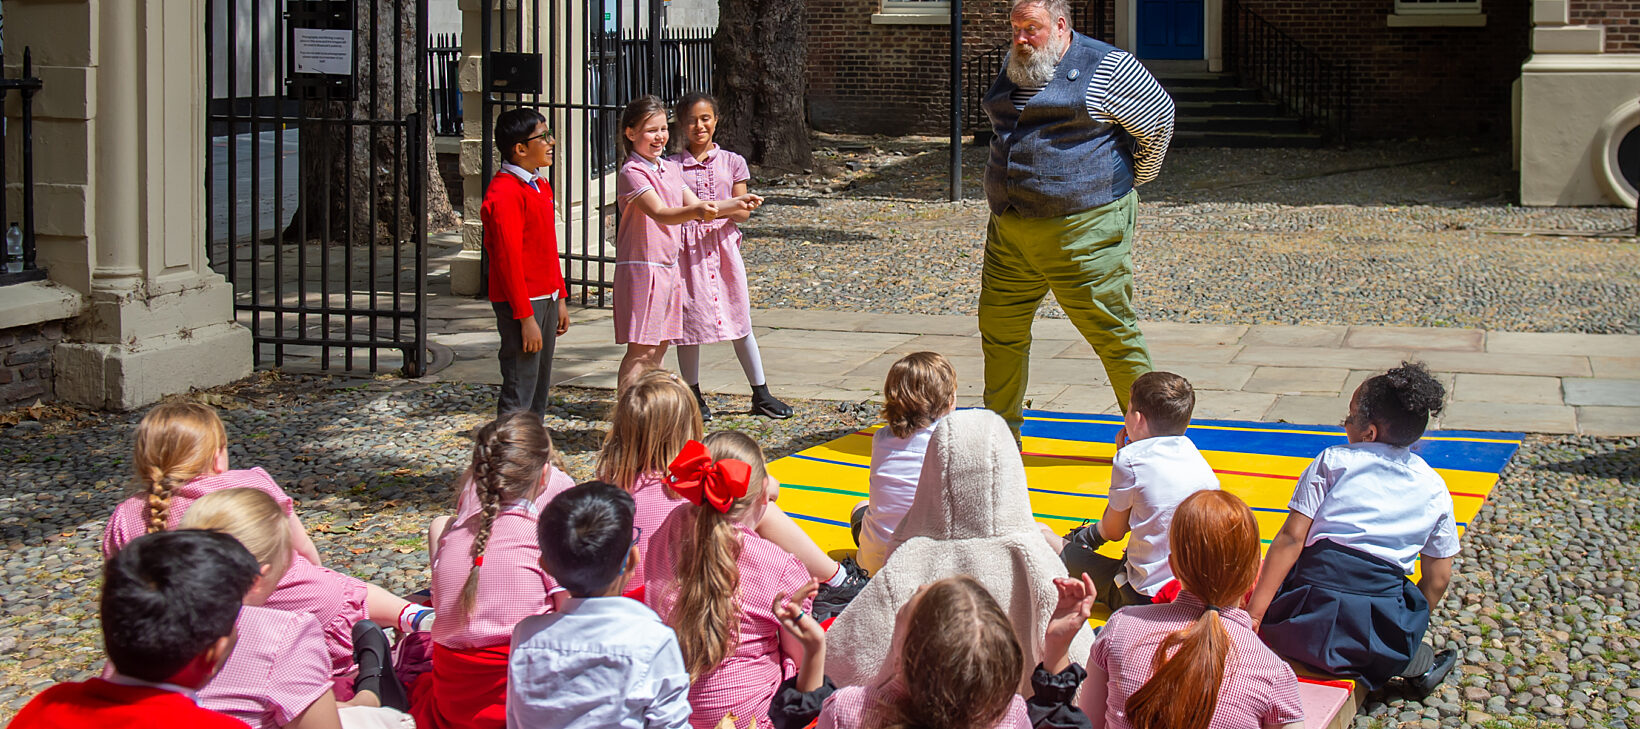 A group of primary school children gather in front of a performer, who is wearing a waist jacket, outside of the Bluecoat building.